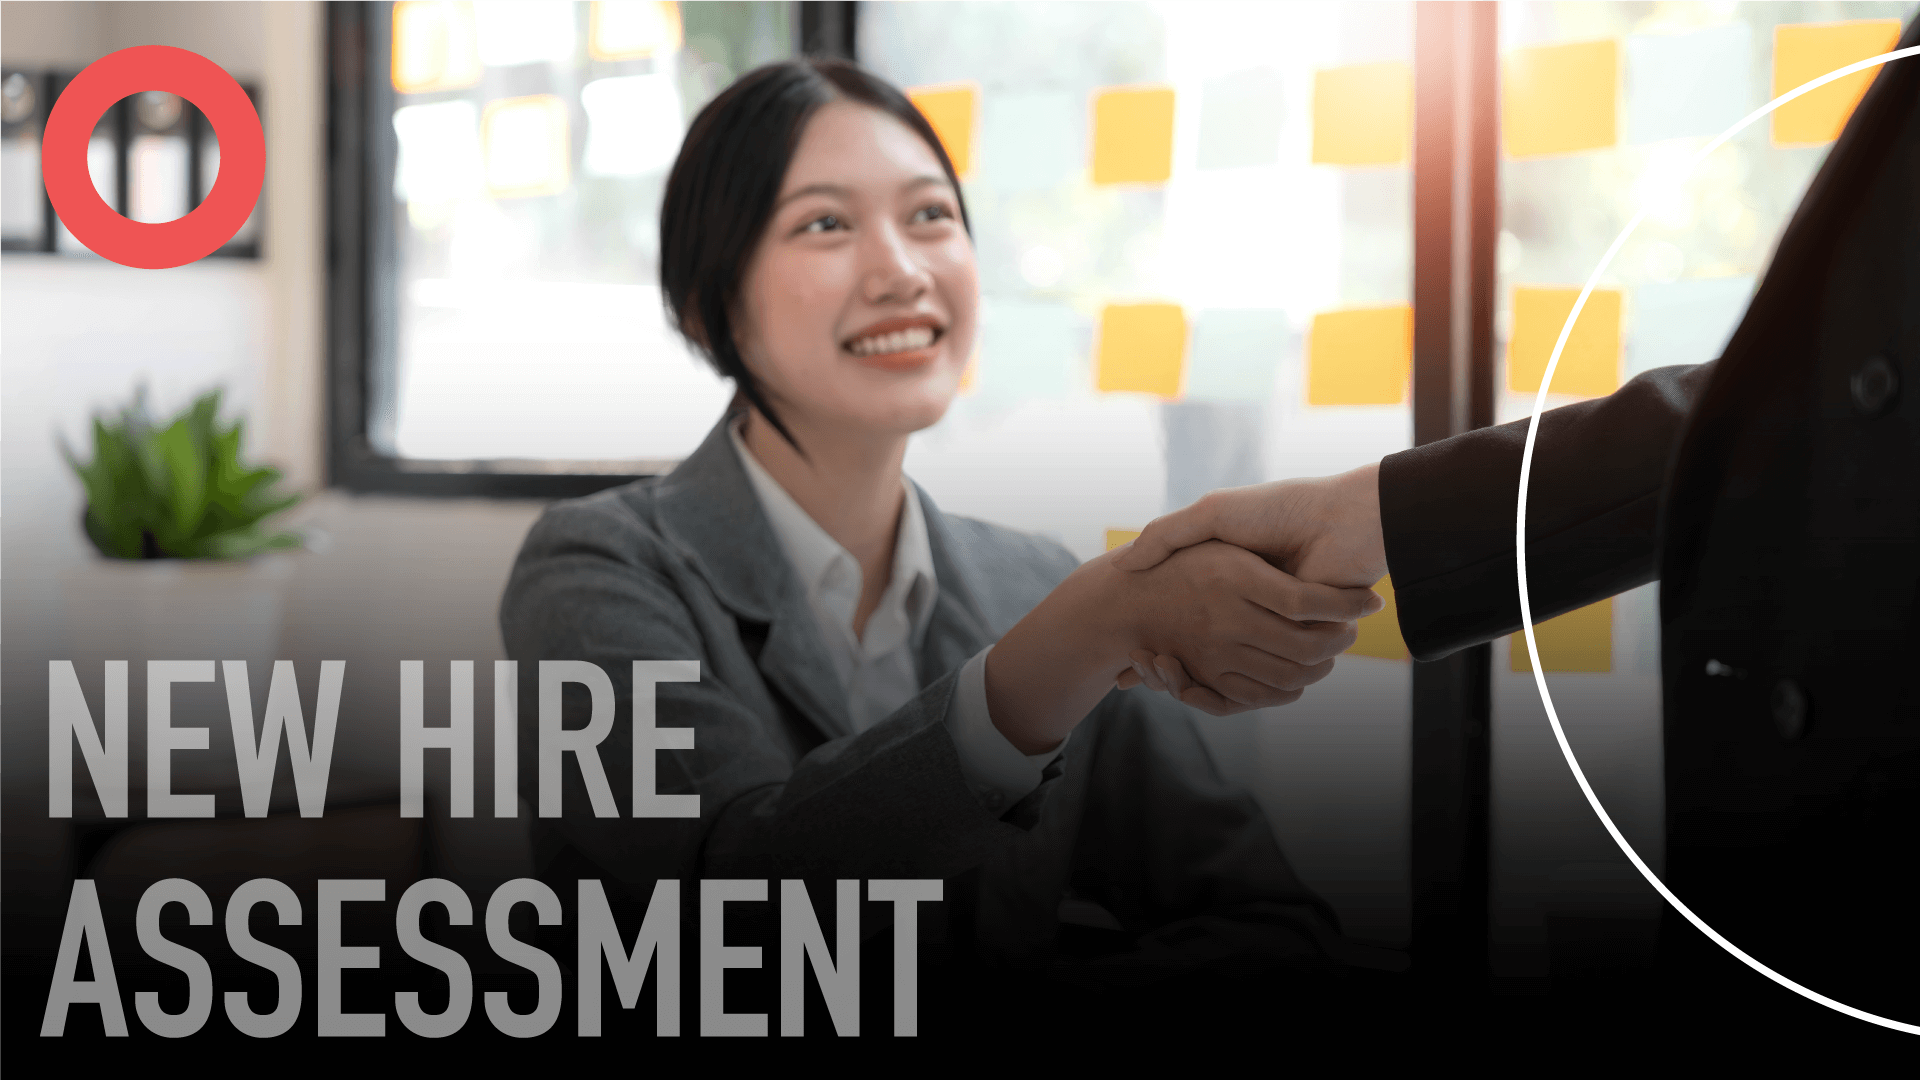 New Hire Assessment collects data on candidate's for your business.